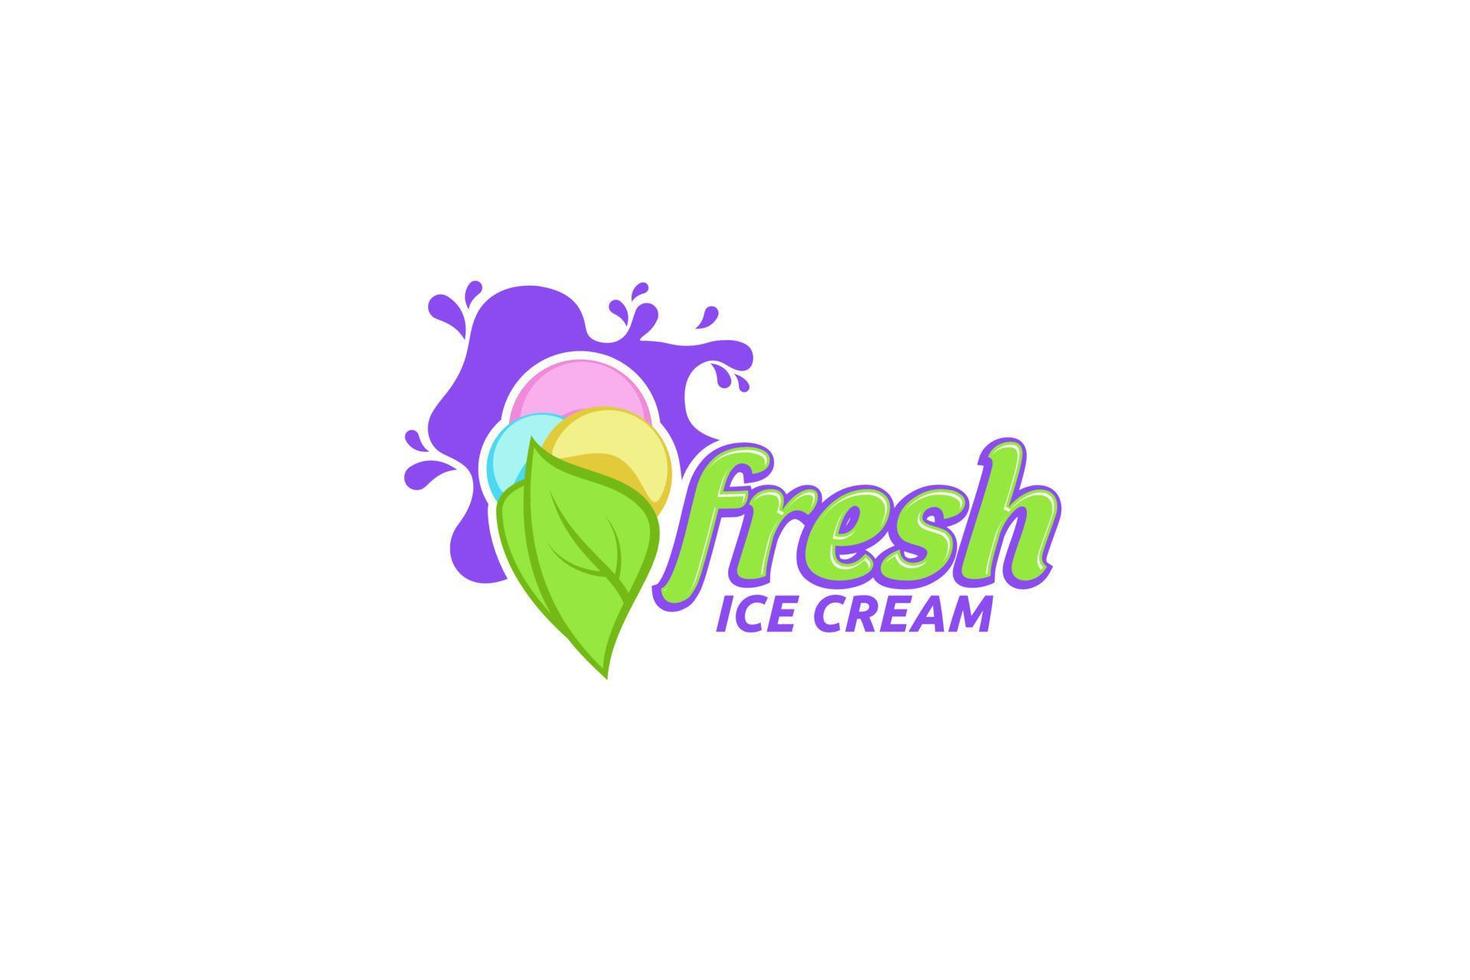 ice cream logo for any business especially for icream shop, store, cafe, etc. vector